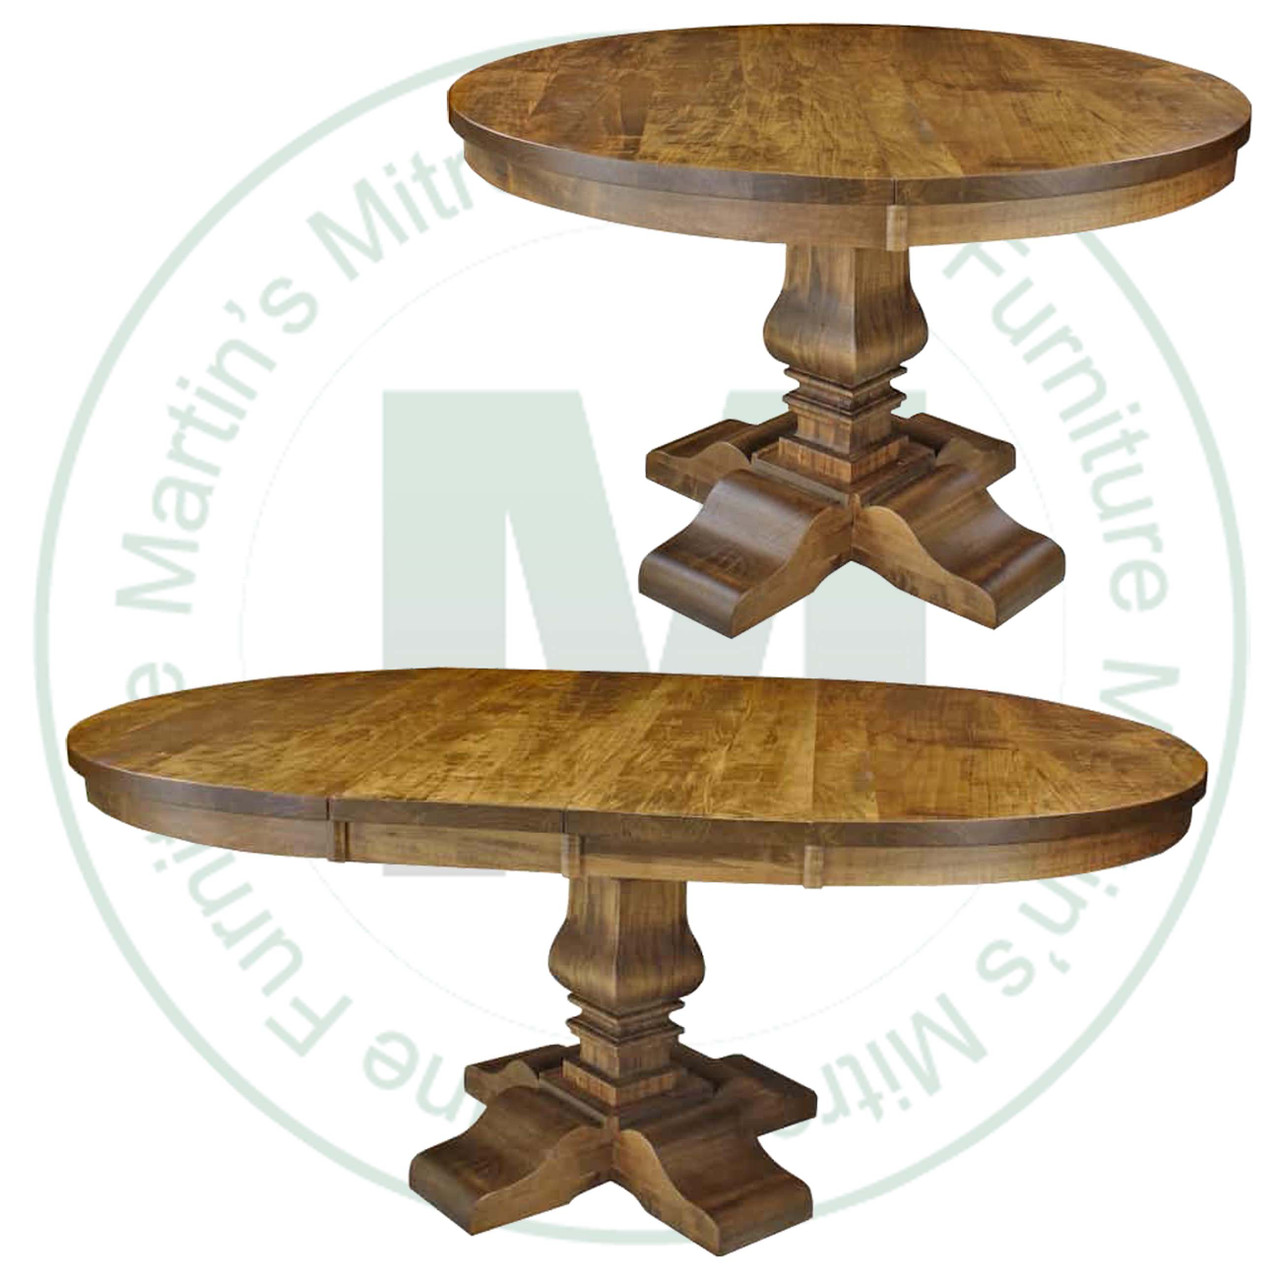 Oak Century Single Pedestal Round Solid Top Table 42'' Deep x 42'' Wide x 30'' High With 2 - 12'' Centre Leaves